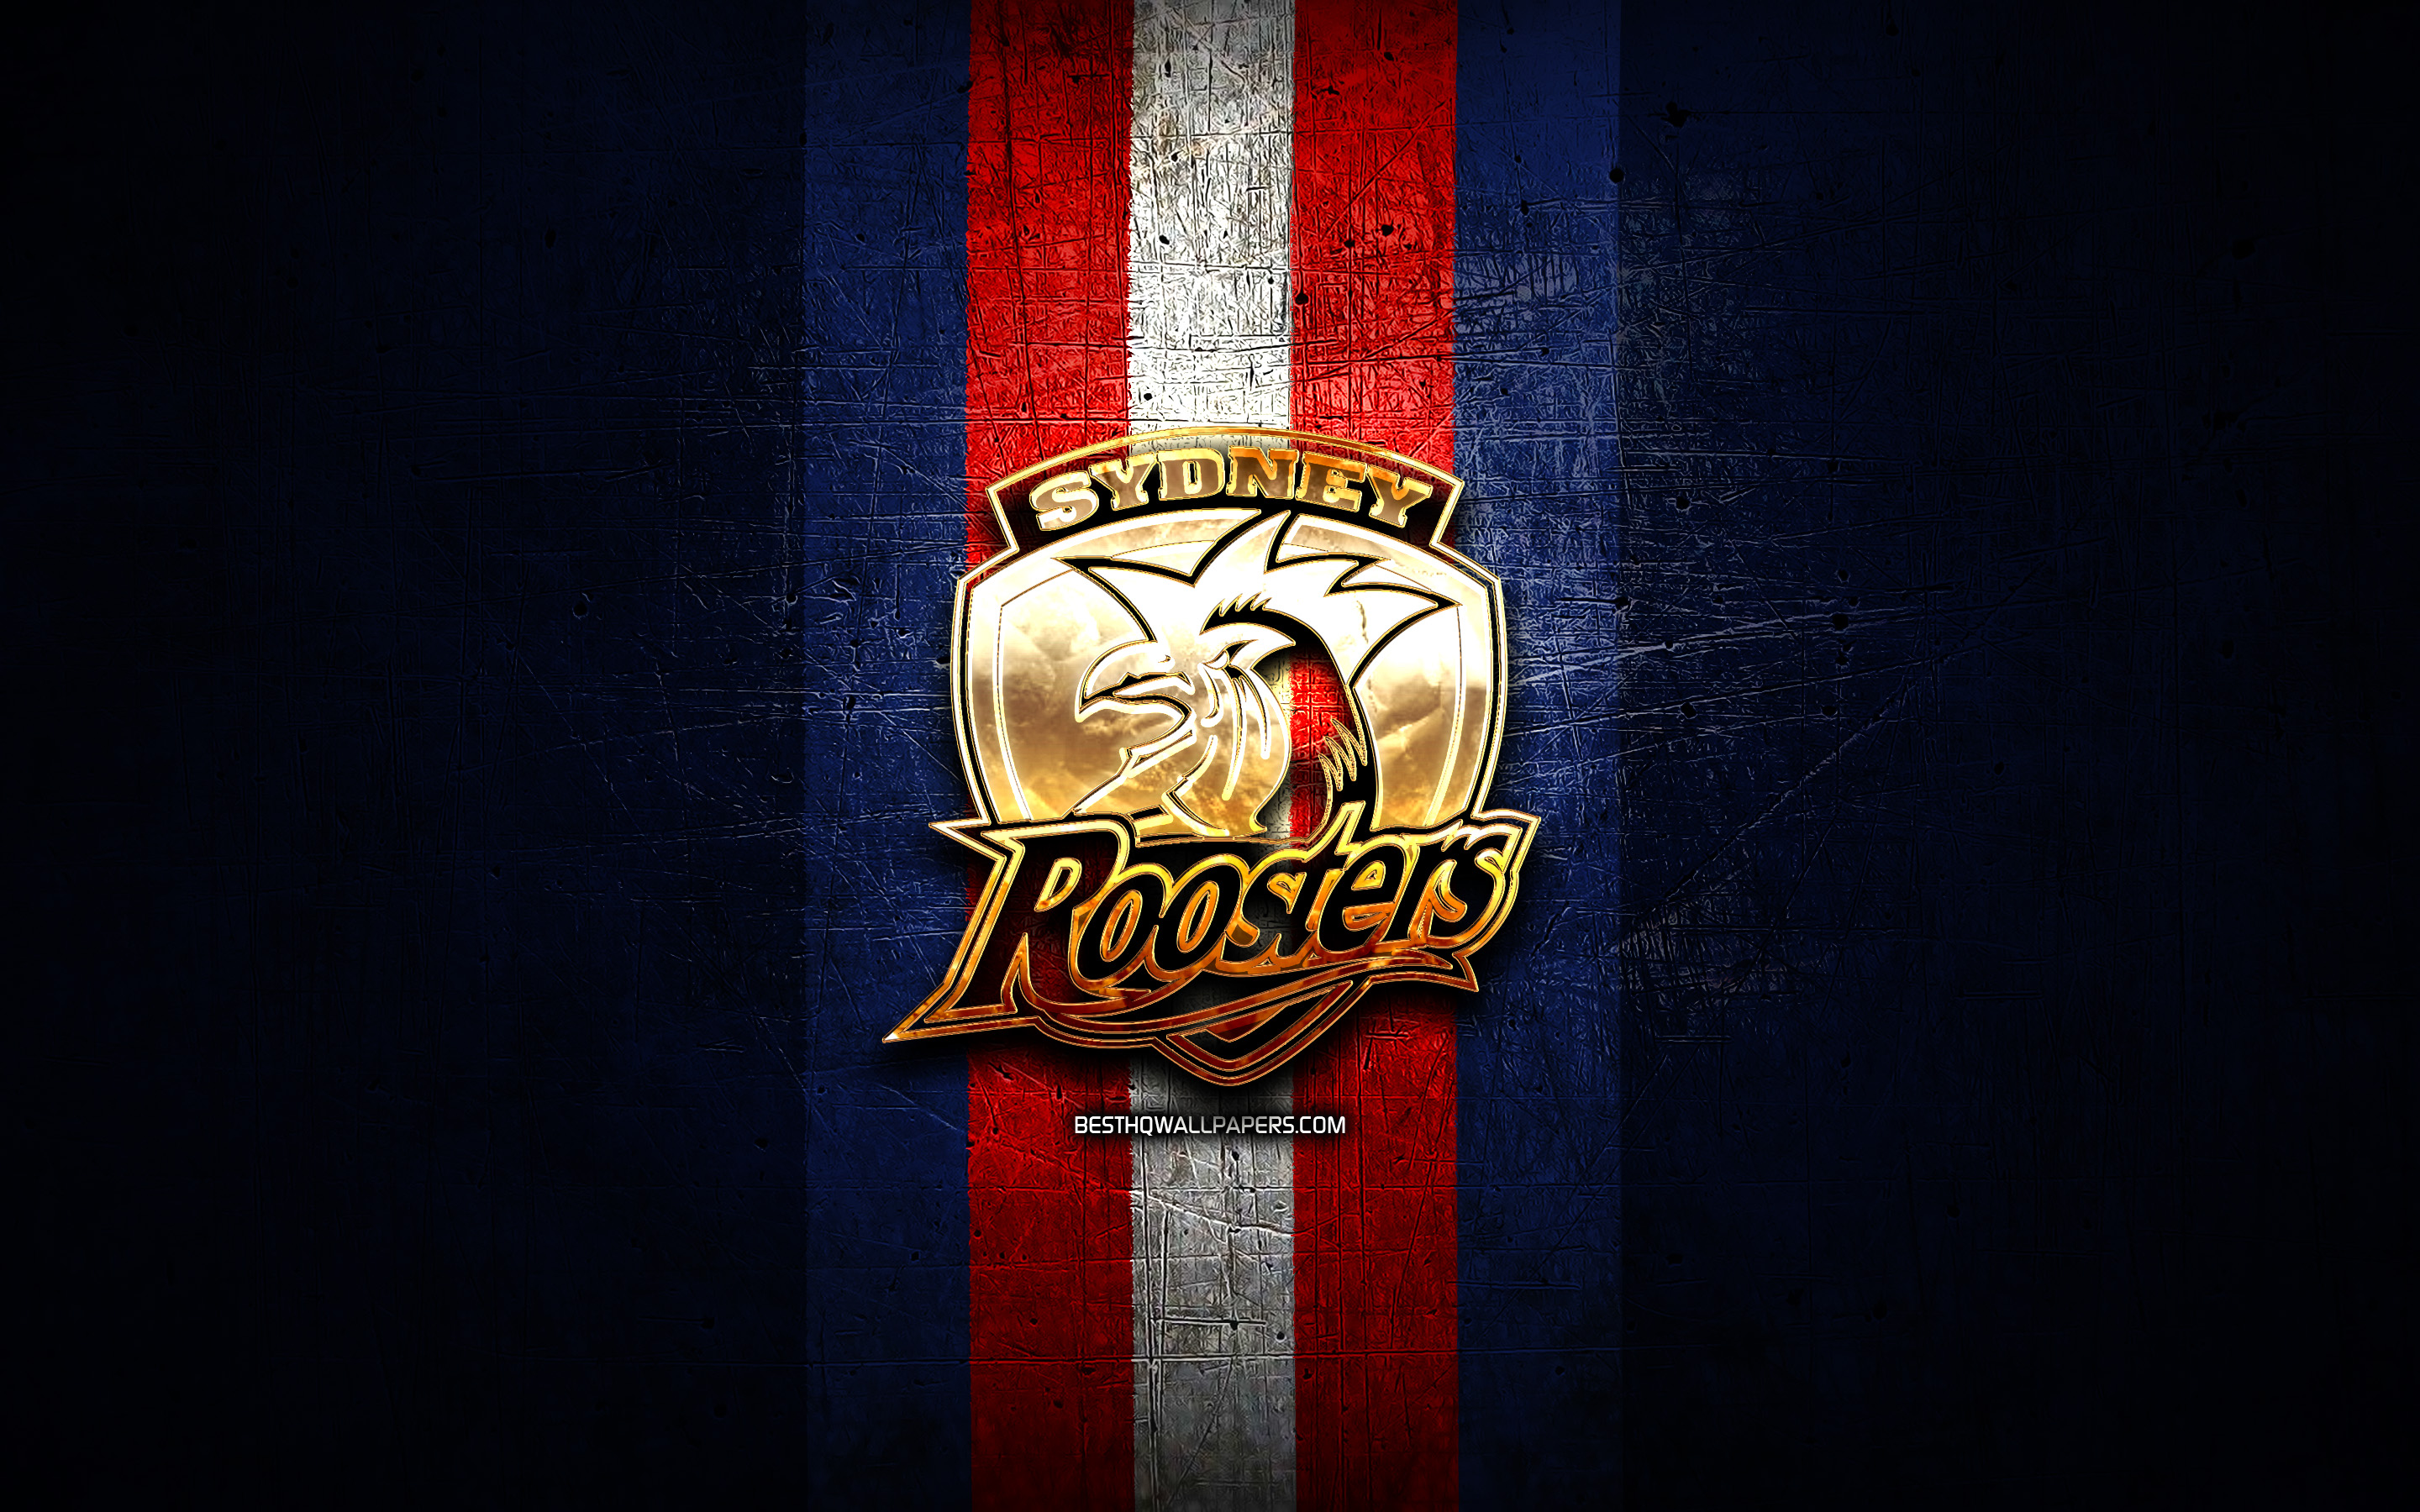 Download wallpaper Sydney Roosters, golden logo, National Rugby League, blue metal background, australian rugby club, Sydney Roosters logo, rugby, NRL for desktop with resolution 2880x1800. High Quality HD picture wallpaper